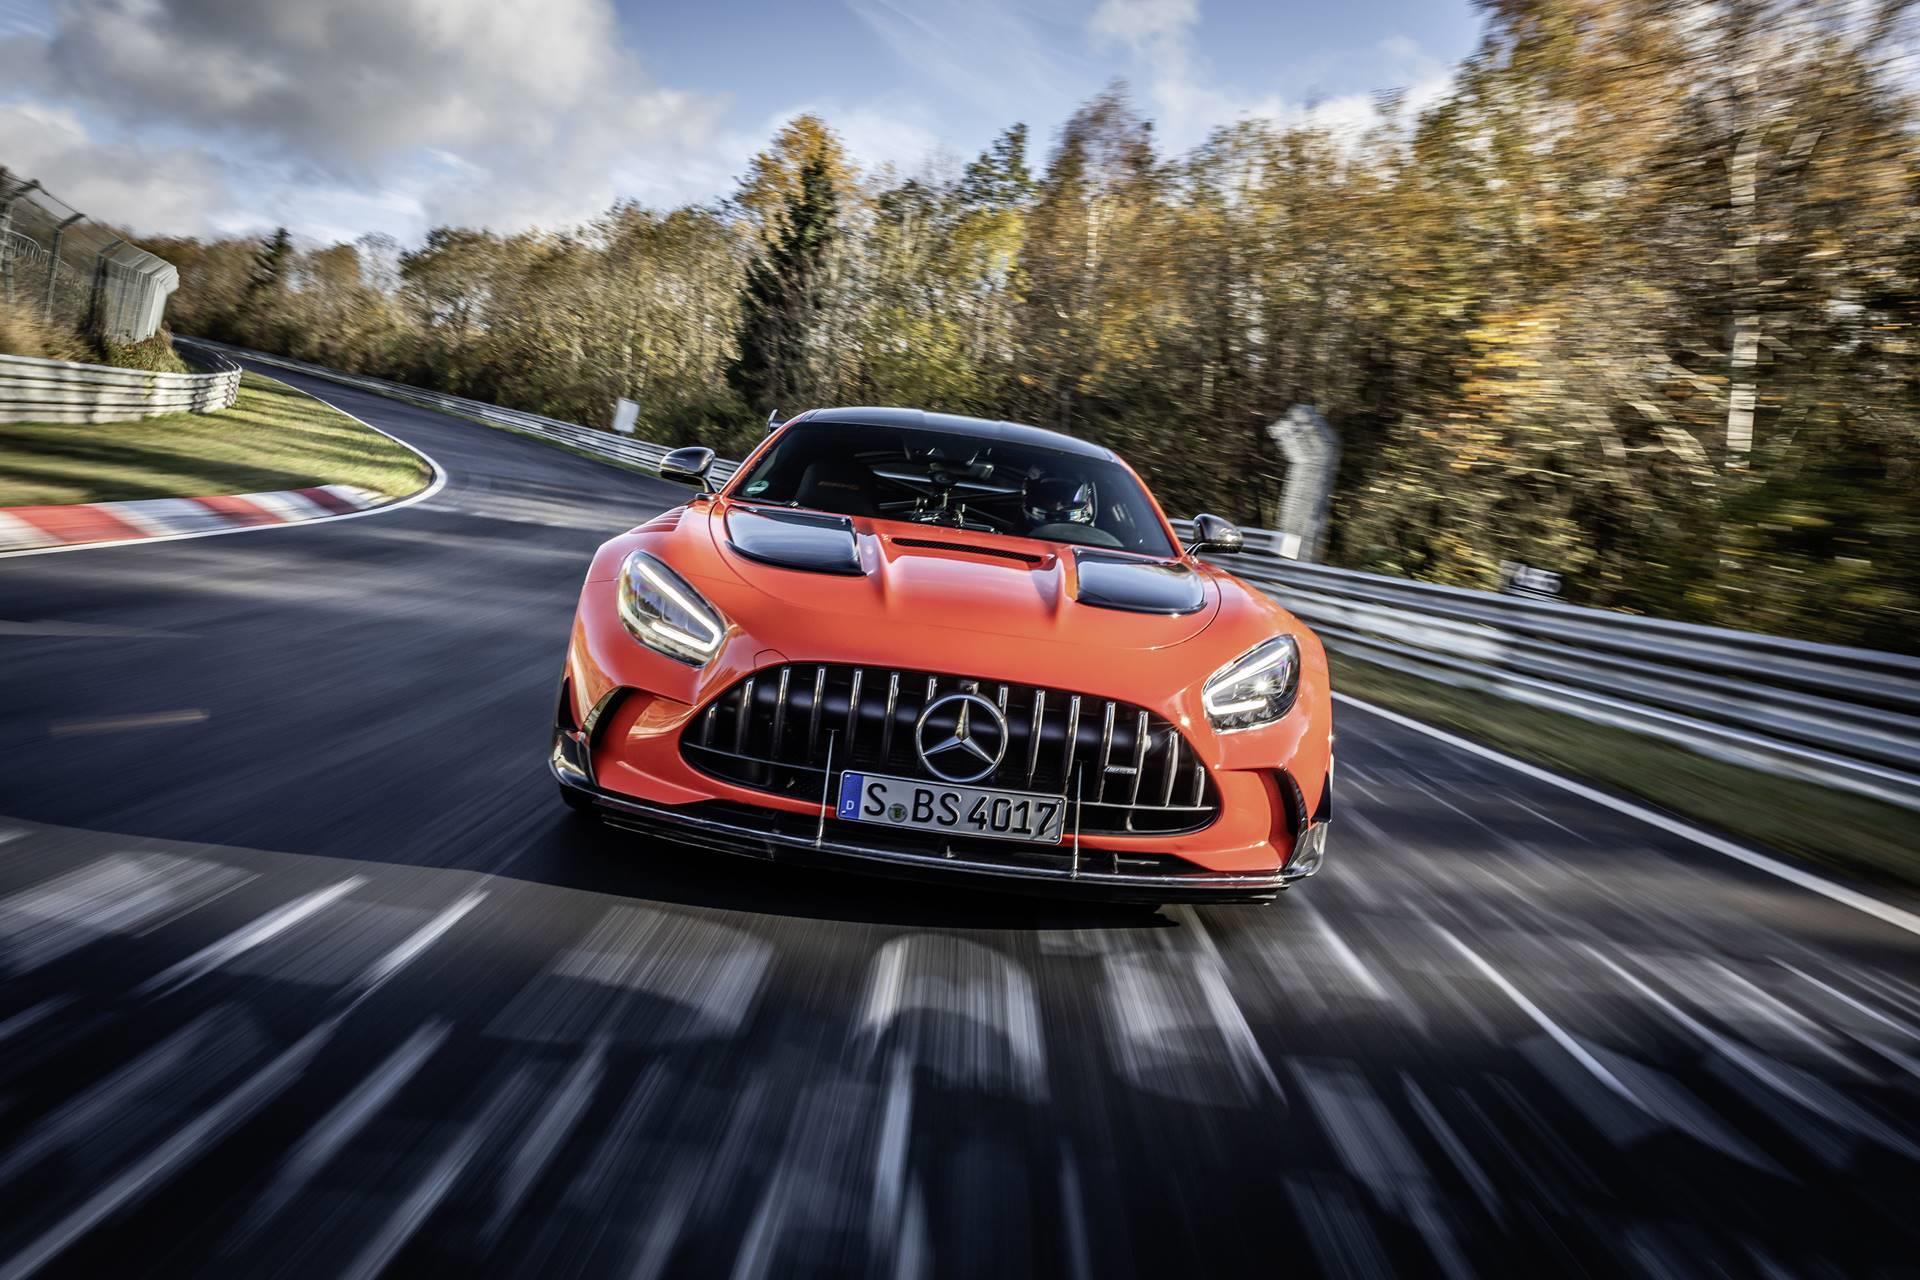 MercedesBenz AMG GT Black Series Wallpaper and Image Gallery